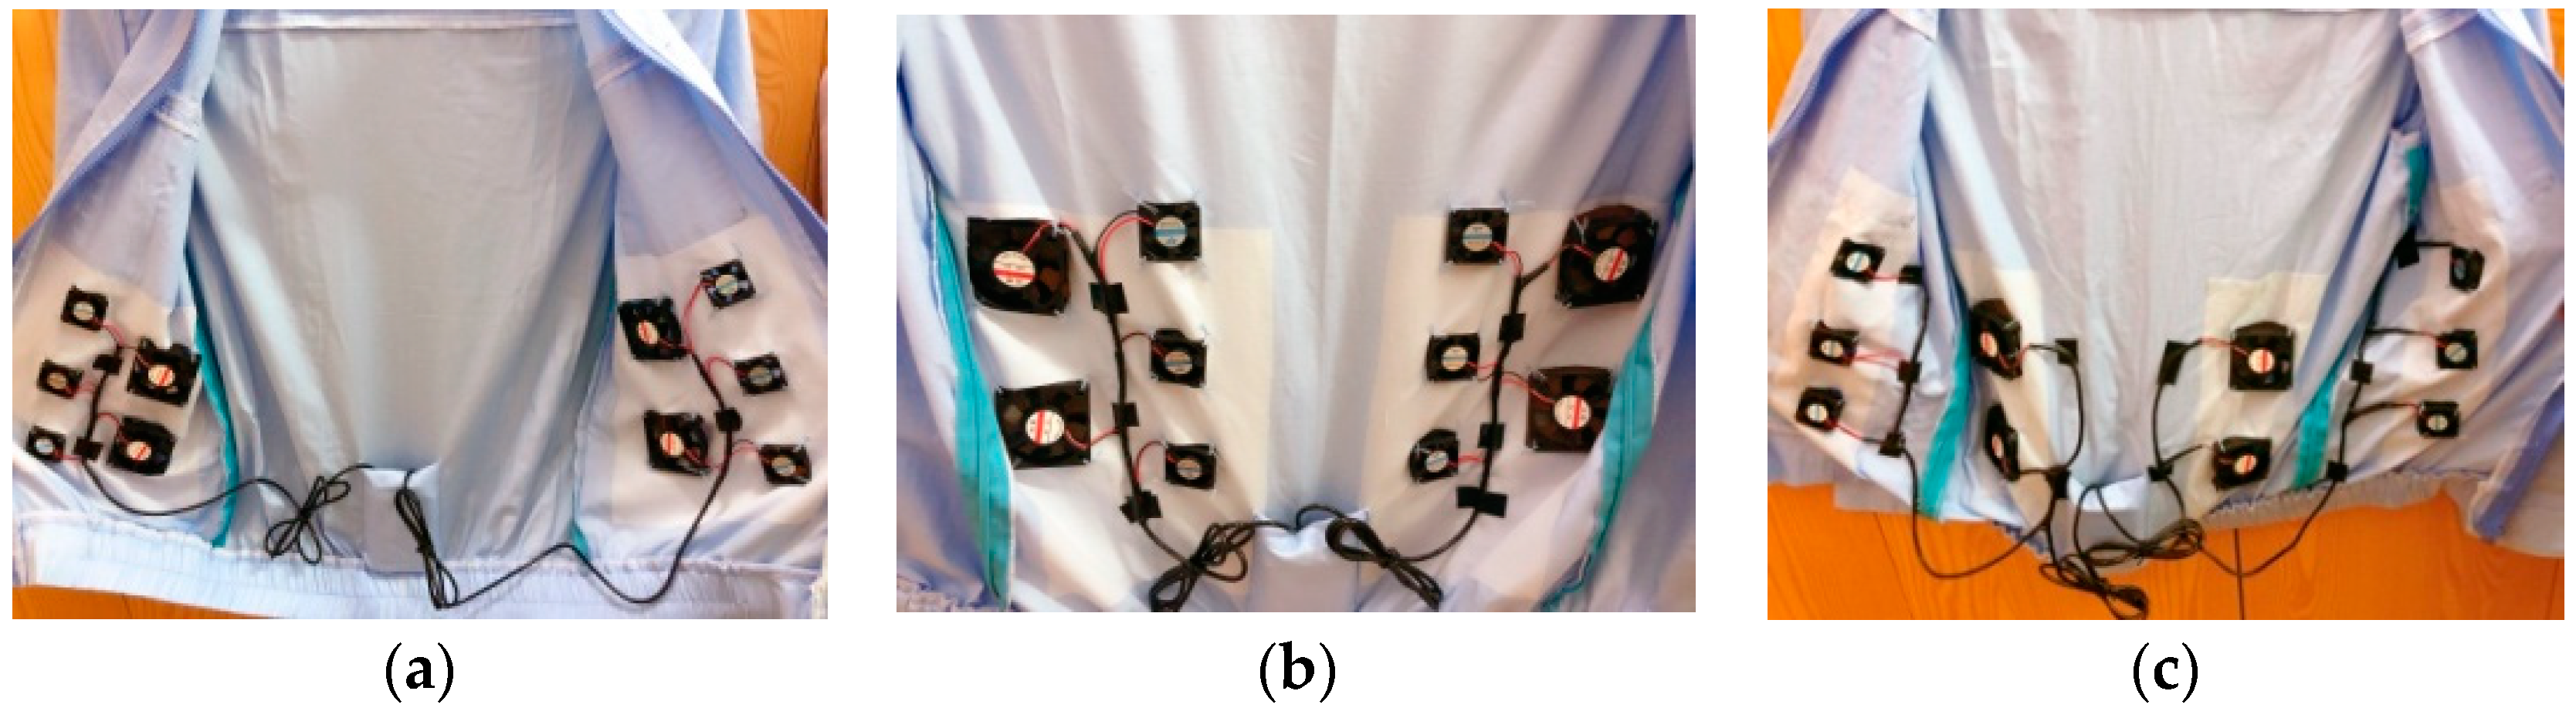 Sustainability | Free Full-Text | Development of Air Ventilation Garments  with Small Fan Panels to Improve Thermal Comfort